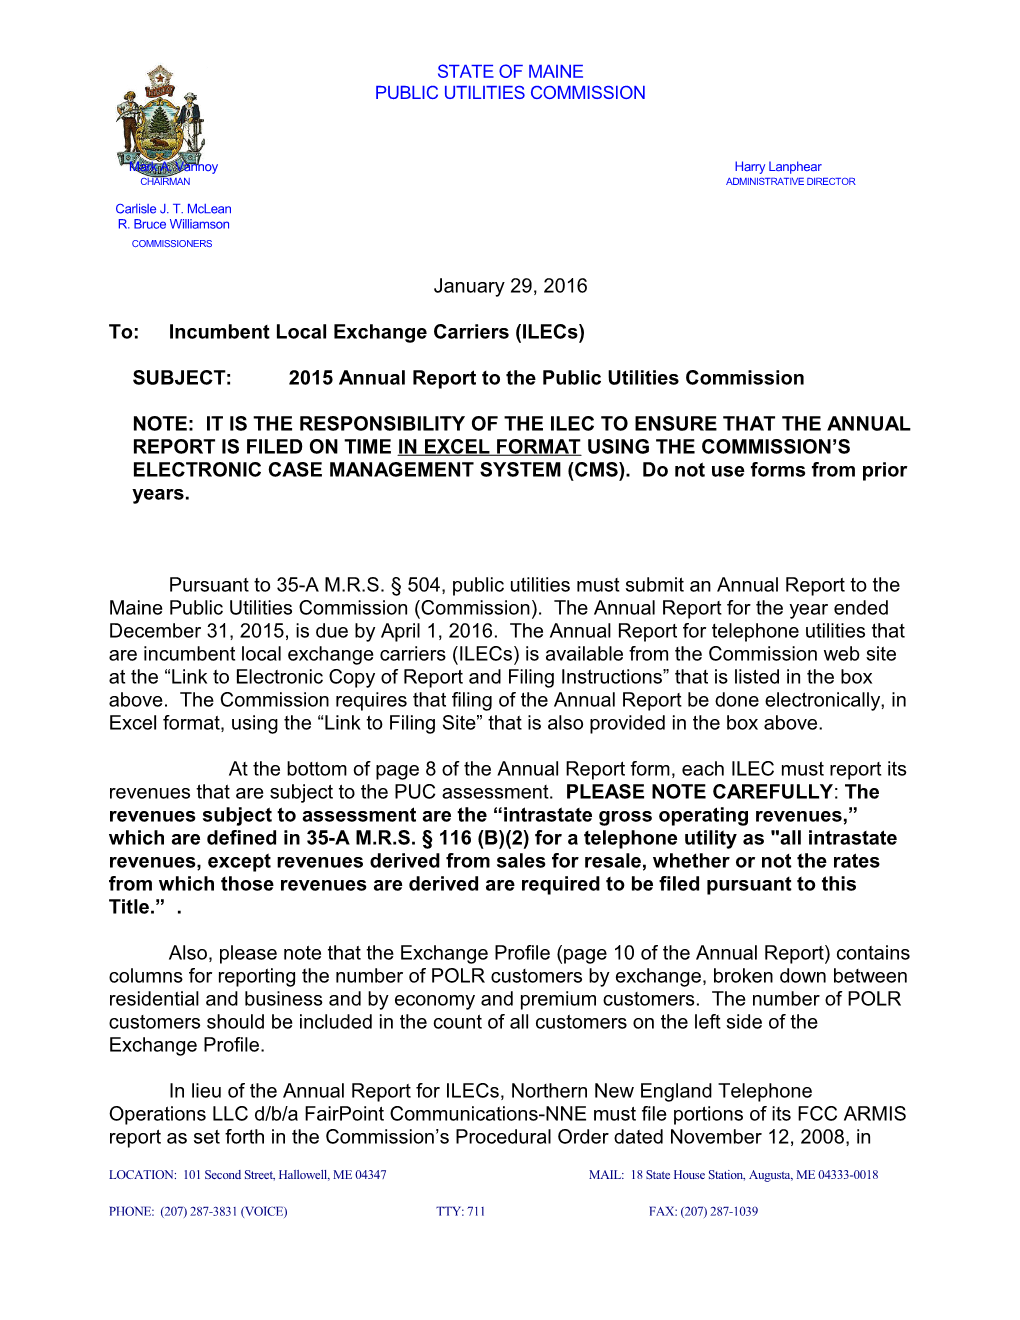 Notice of Annual Report Requirement from Public Utilities Commission